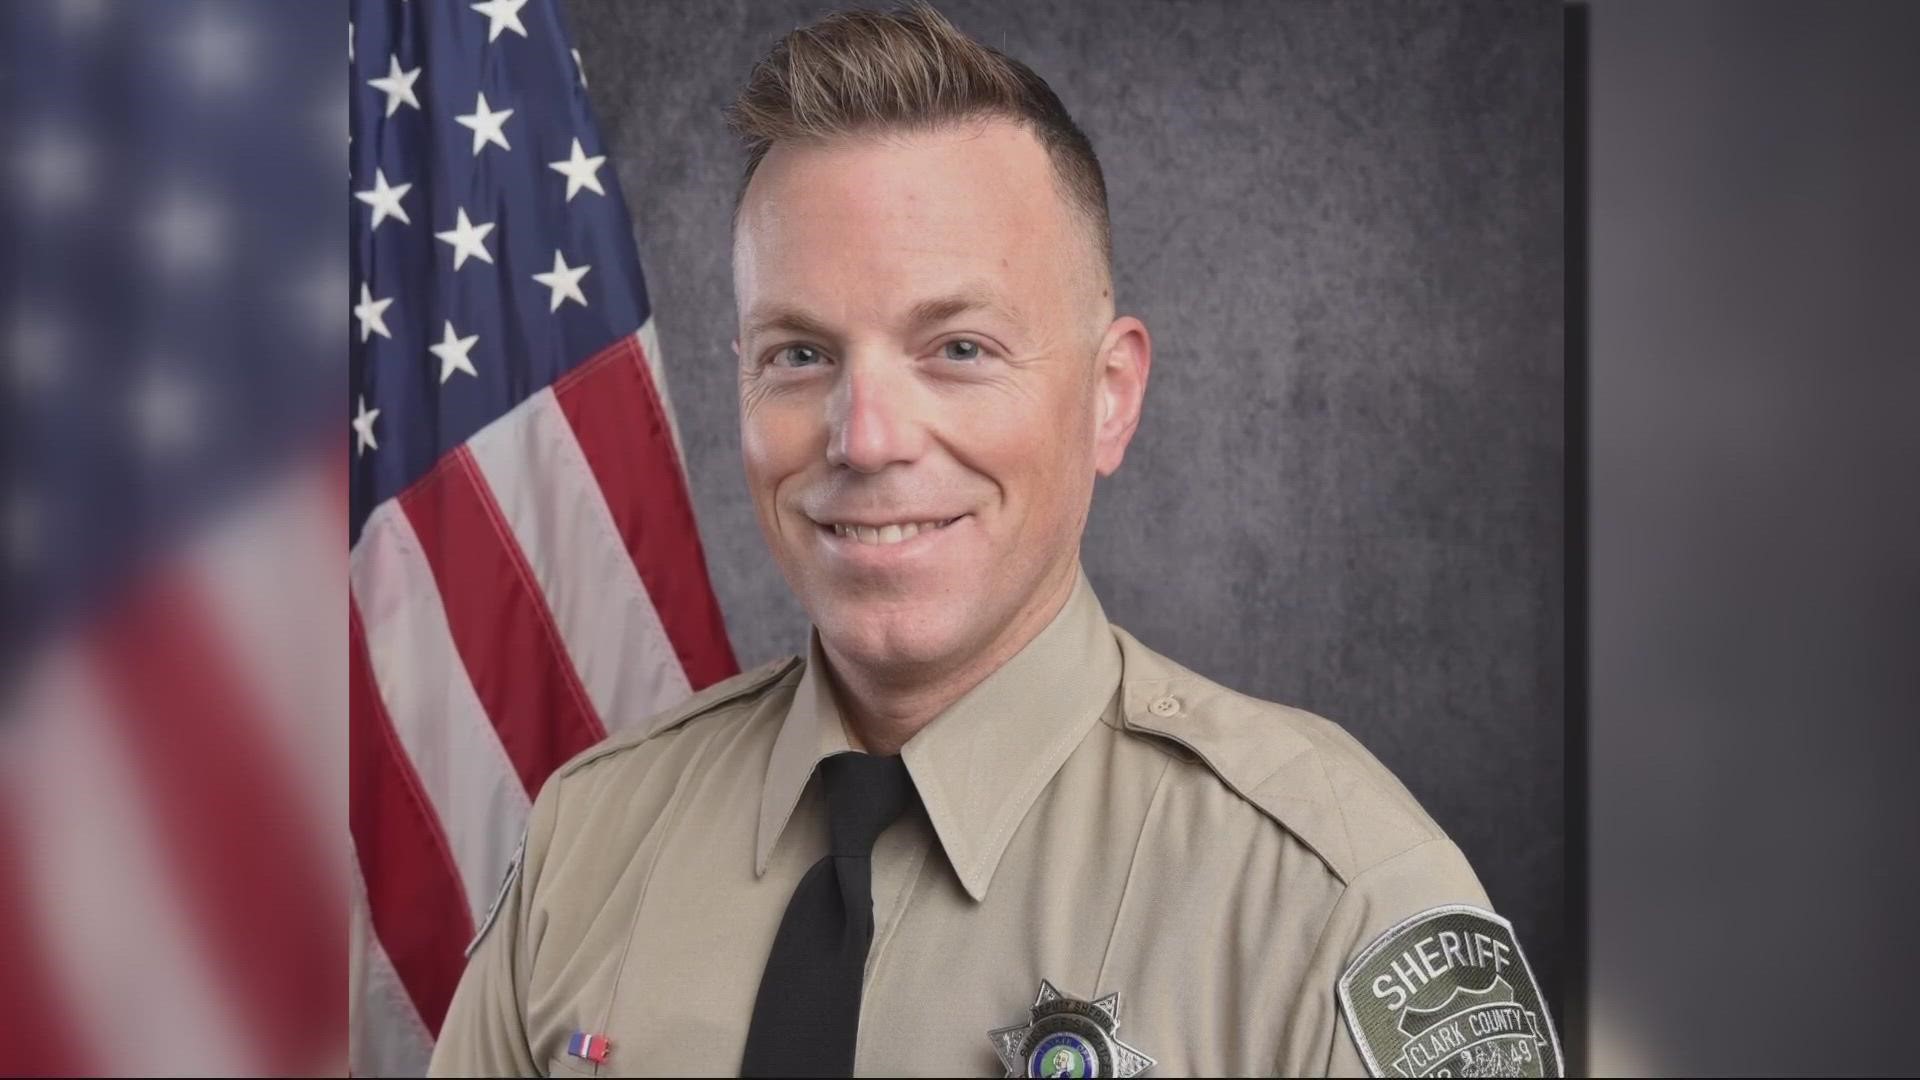 Deputy Drew Kennison was driving back to Clark County from SWAT training when the accident happened.